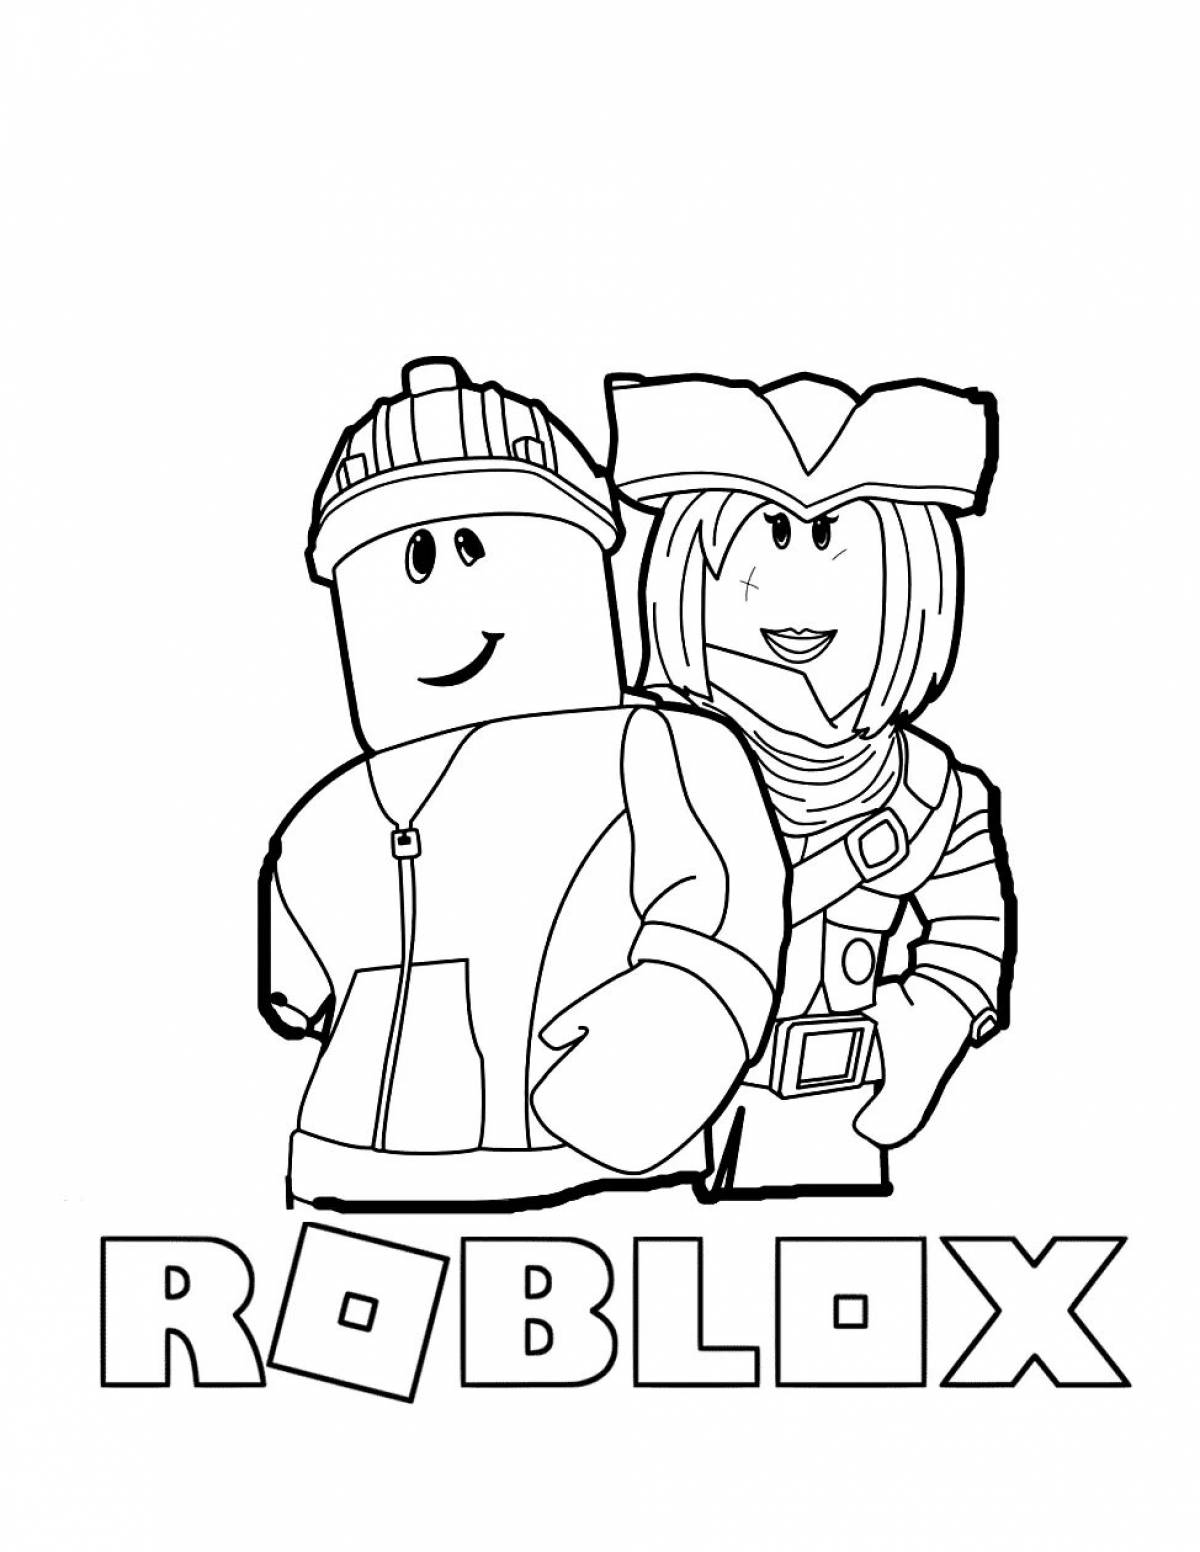 Roblox freaky donator coloring book